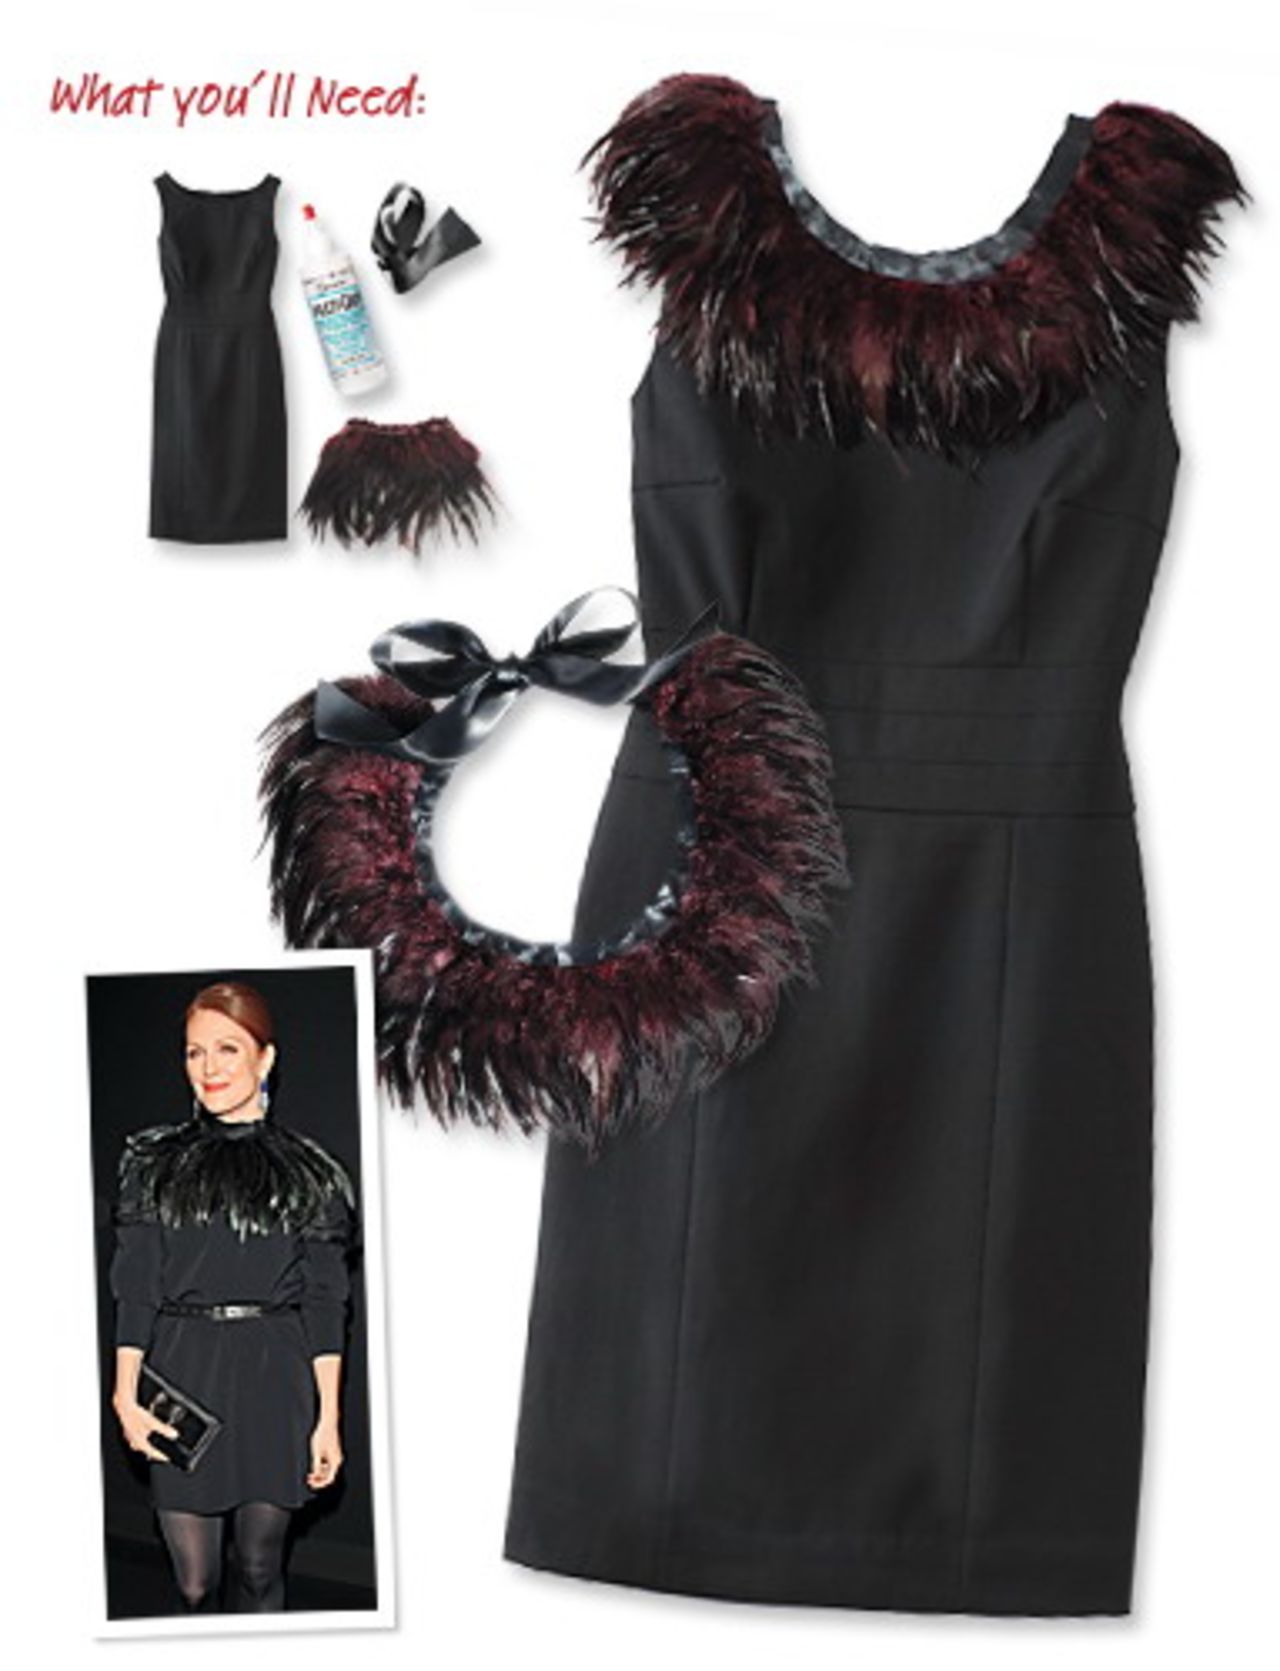 Feather-collared little black dress, inspired by Julianne Moore